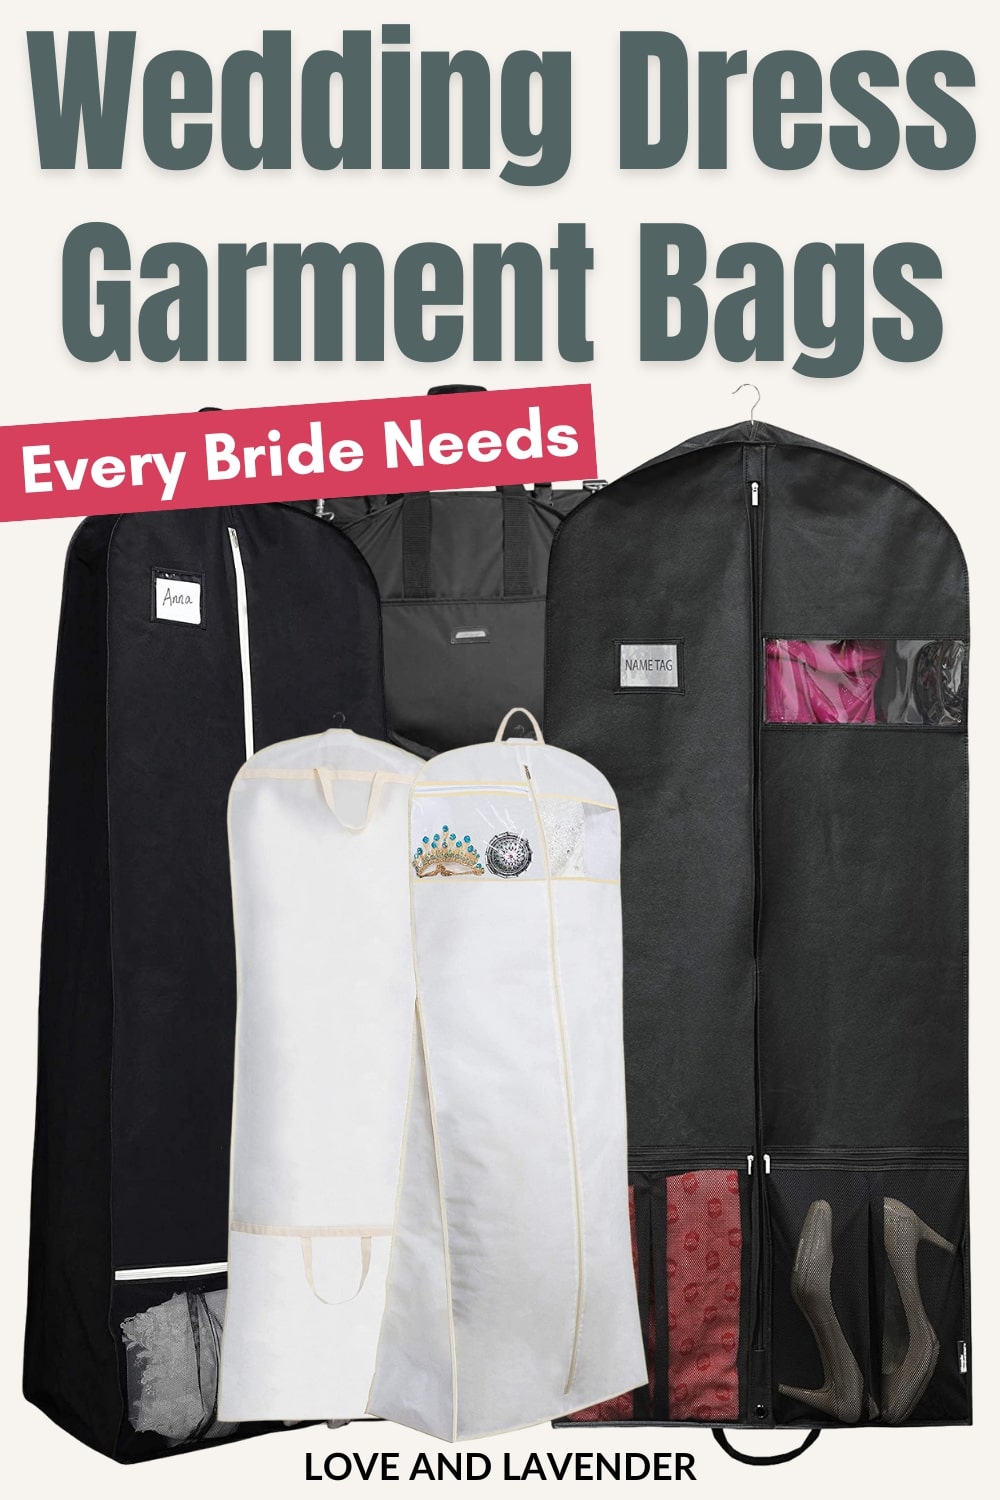 11 Bridal Garment Bags to Buy for your Wedding Day